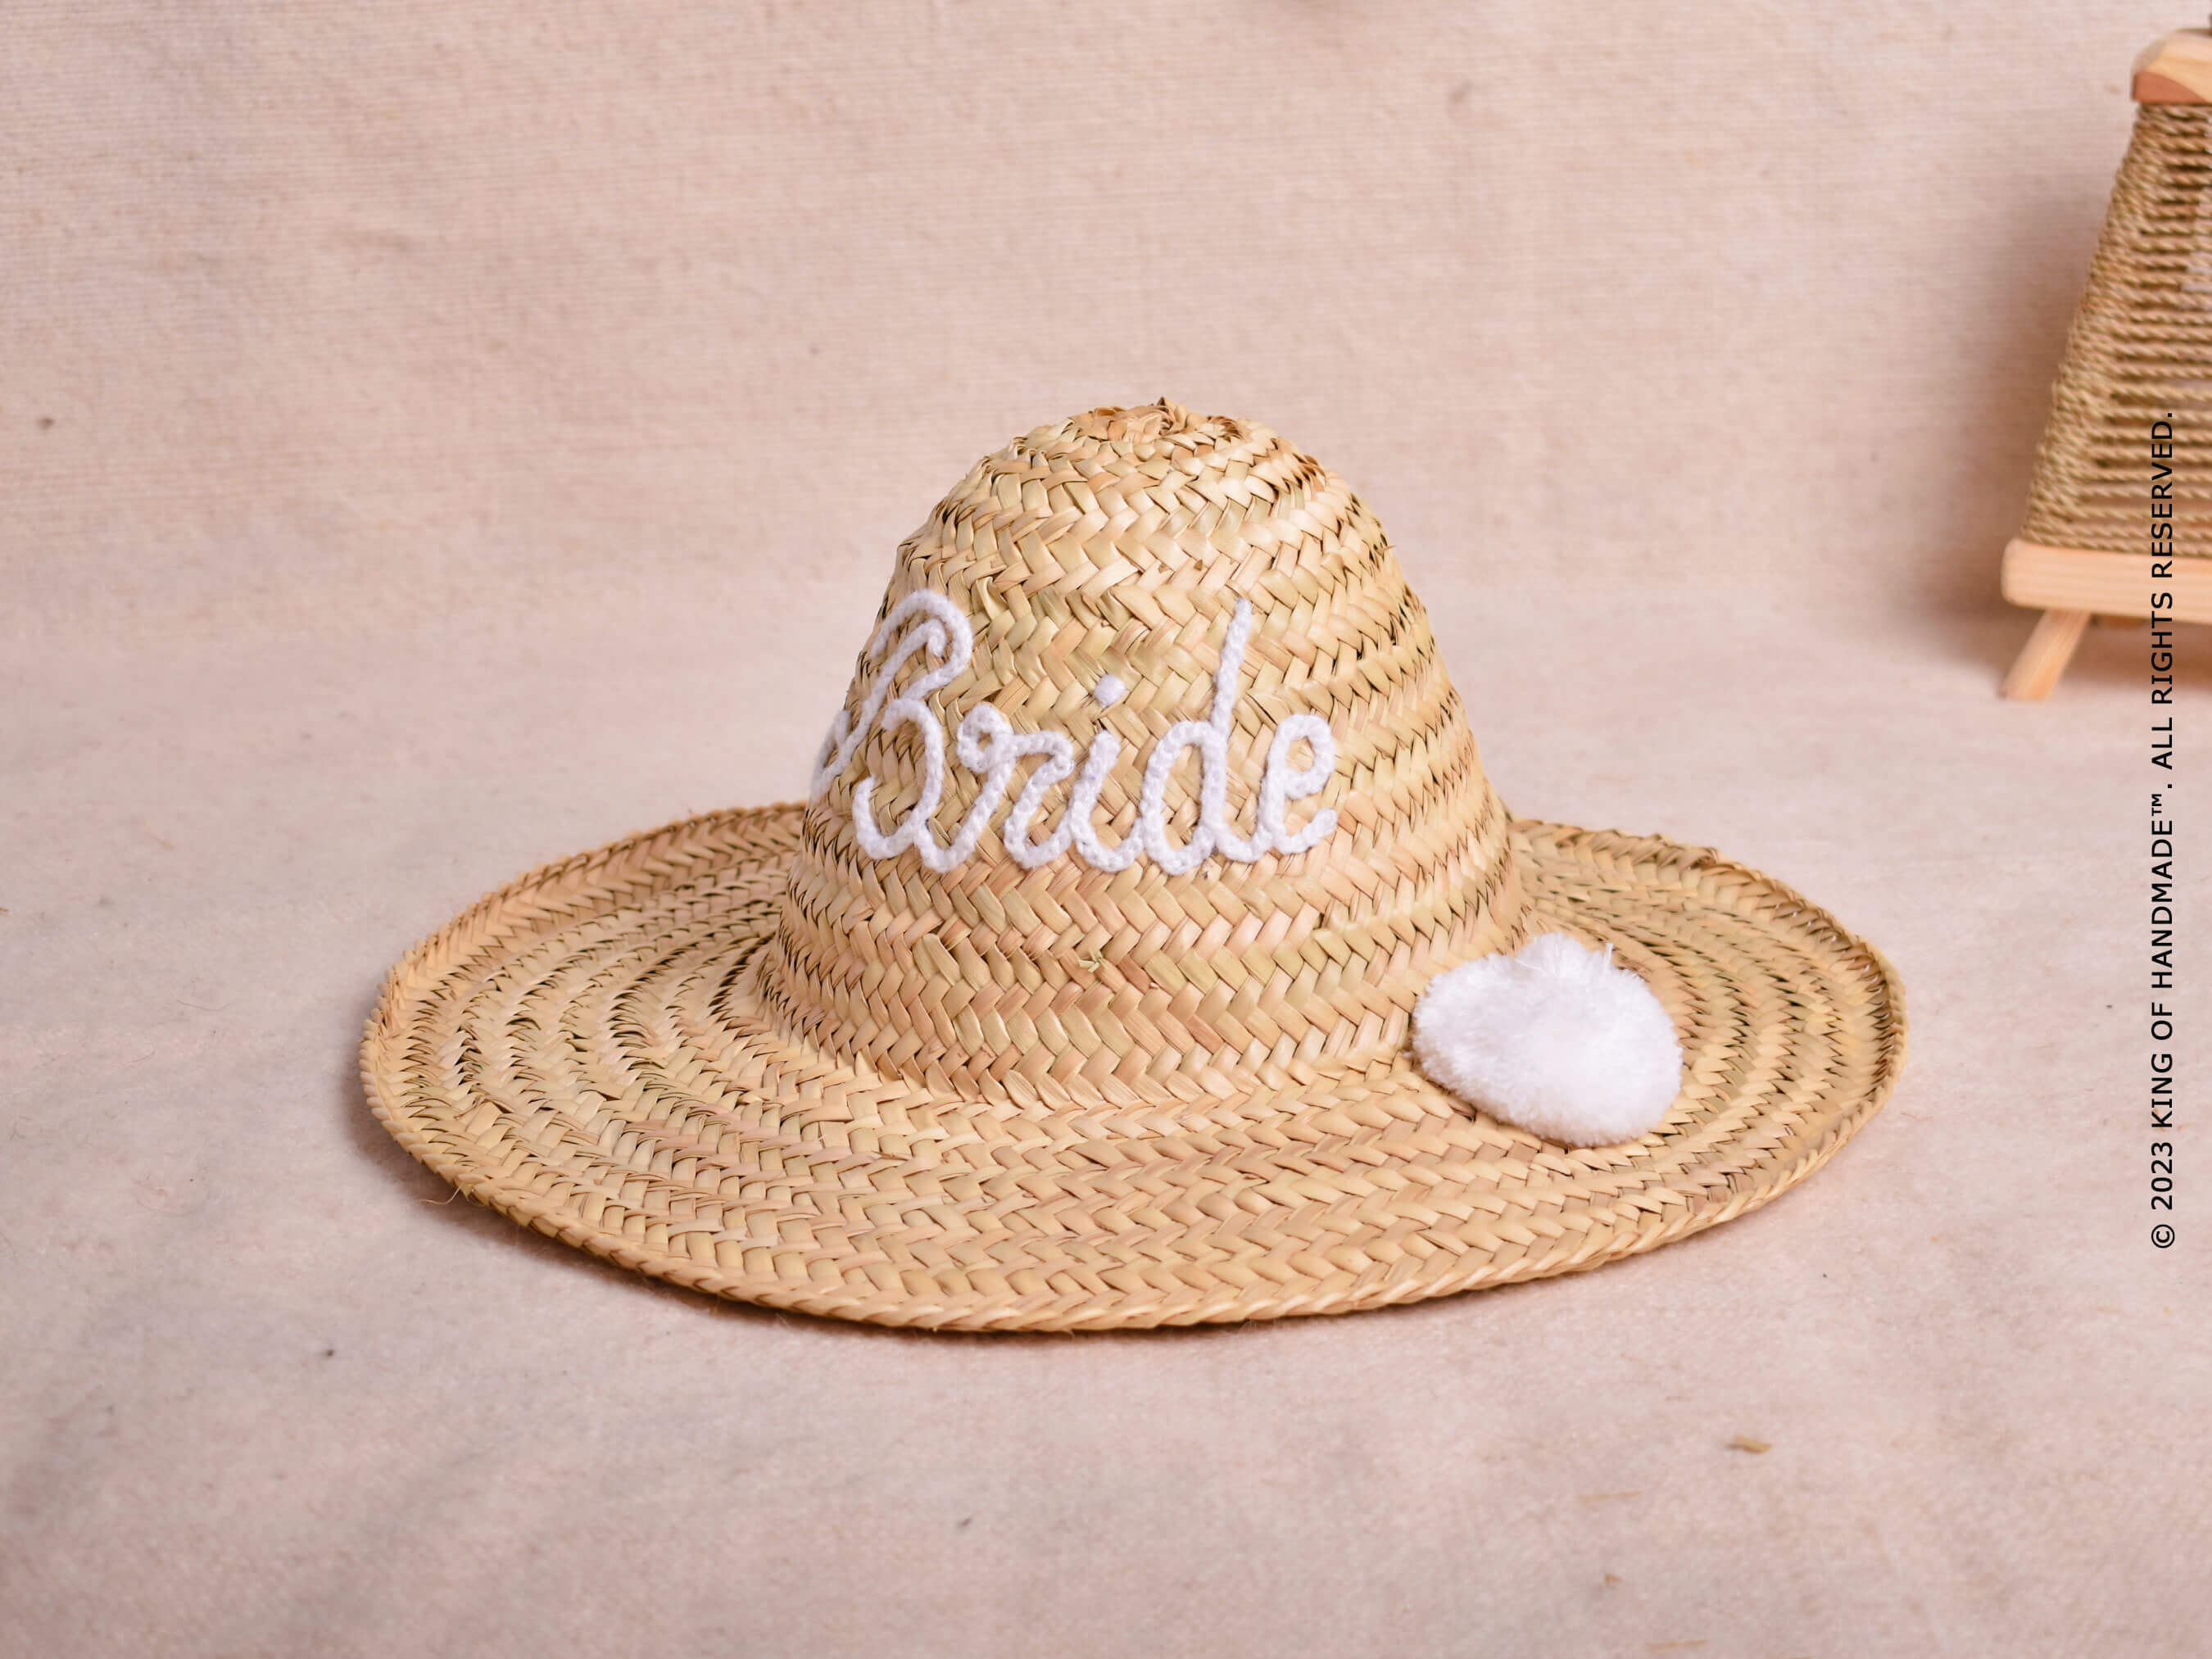 Style, Sun Protection, Memories: Your High-Benefit Personalized Straw Beach Hat!